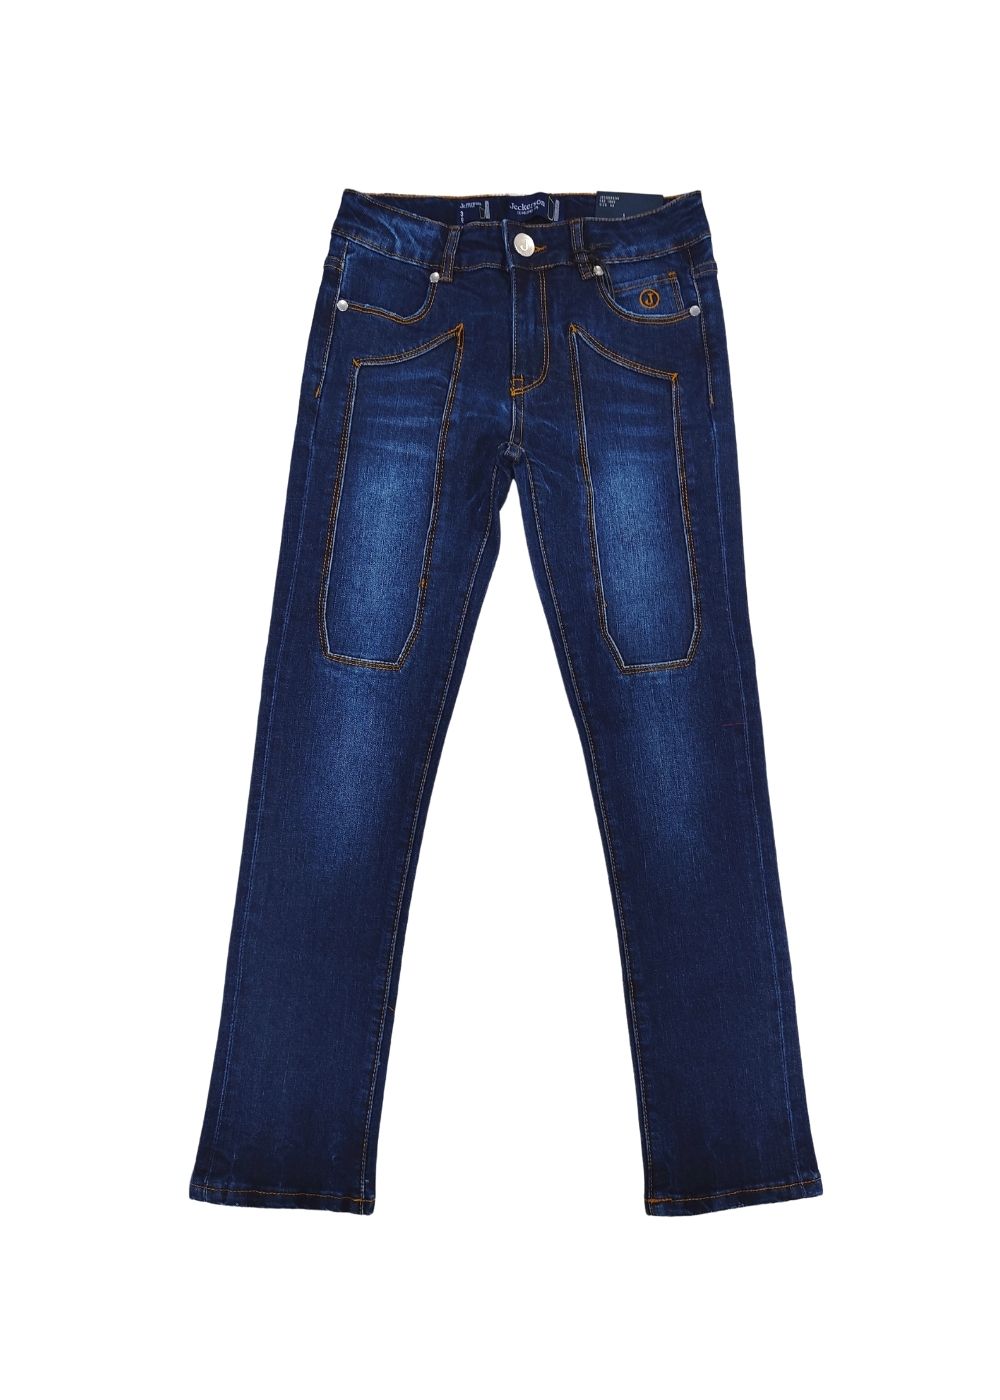 Featured image for “JECKERSON JEANS IN DENIM”